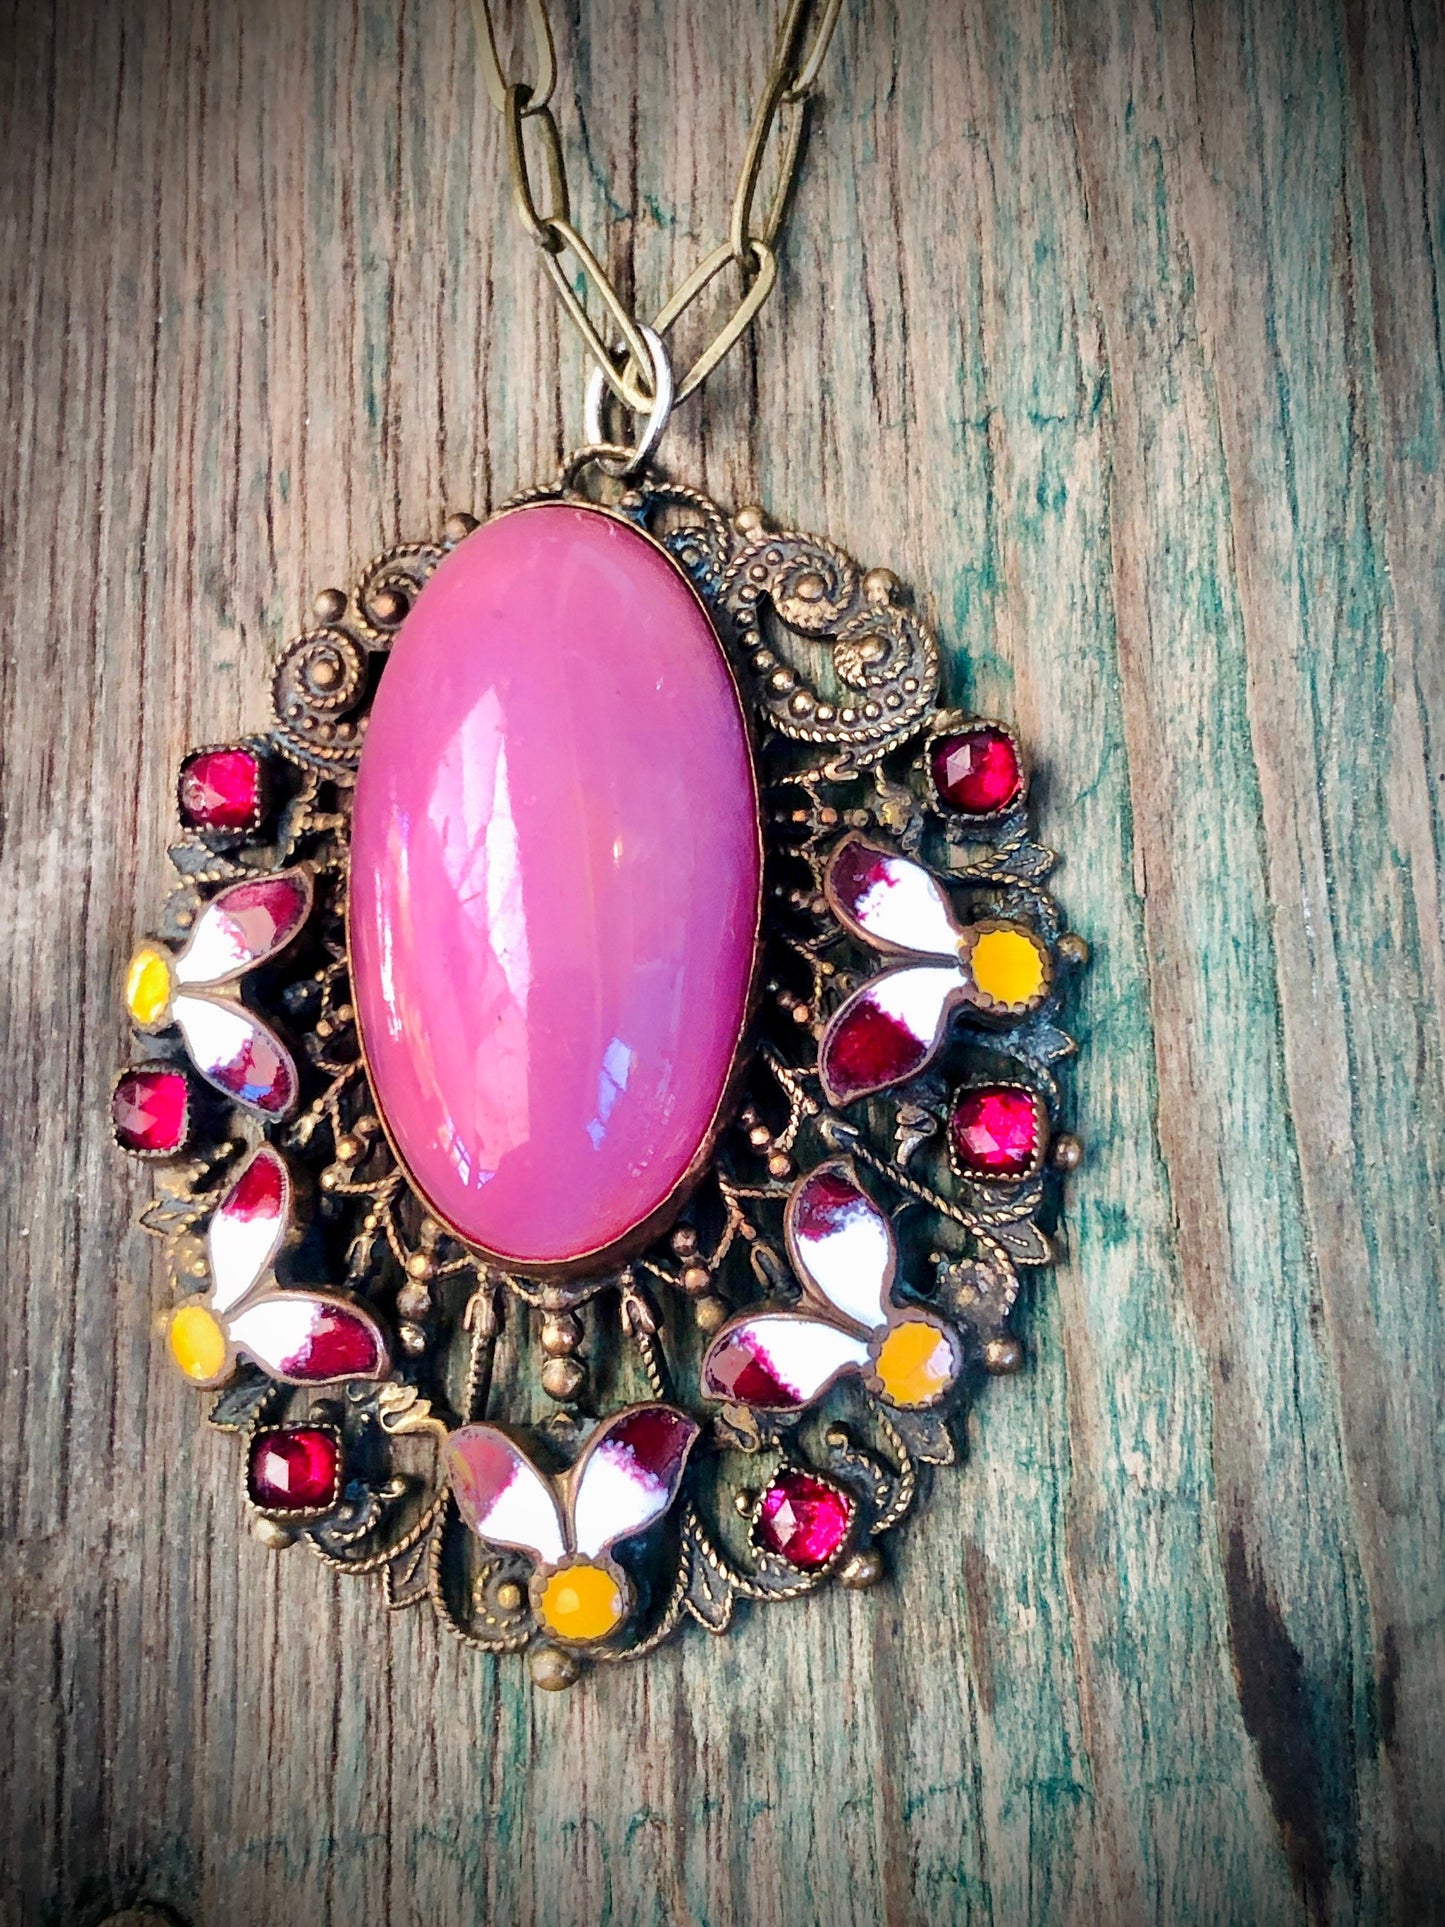 Gorgeous Vintage Art Nouveau Czech Pink Art Glass with Yellow, White & Red Enamel in Brass Filigree Necklace